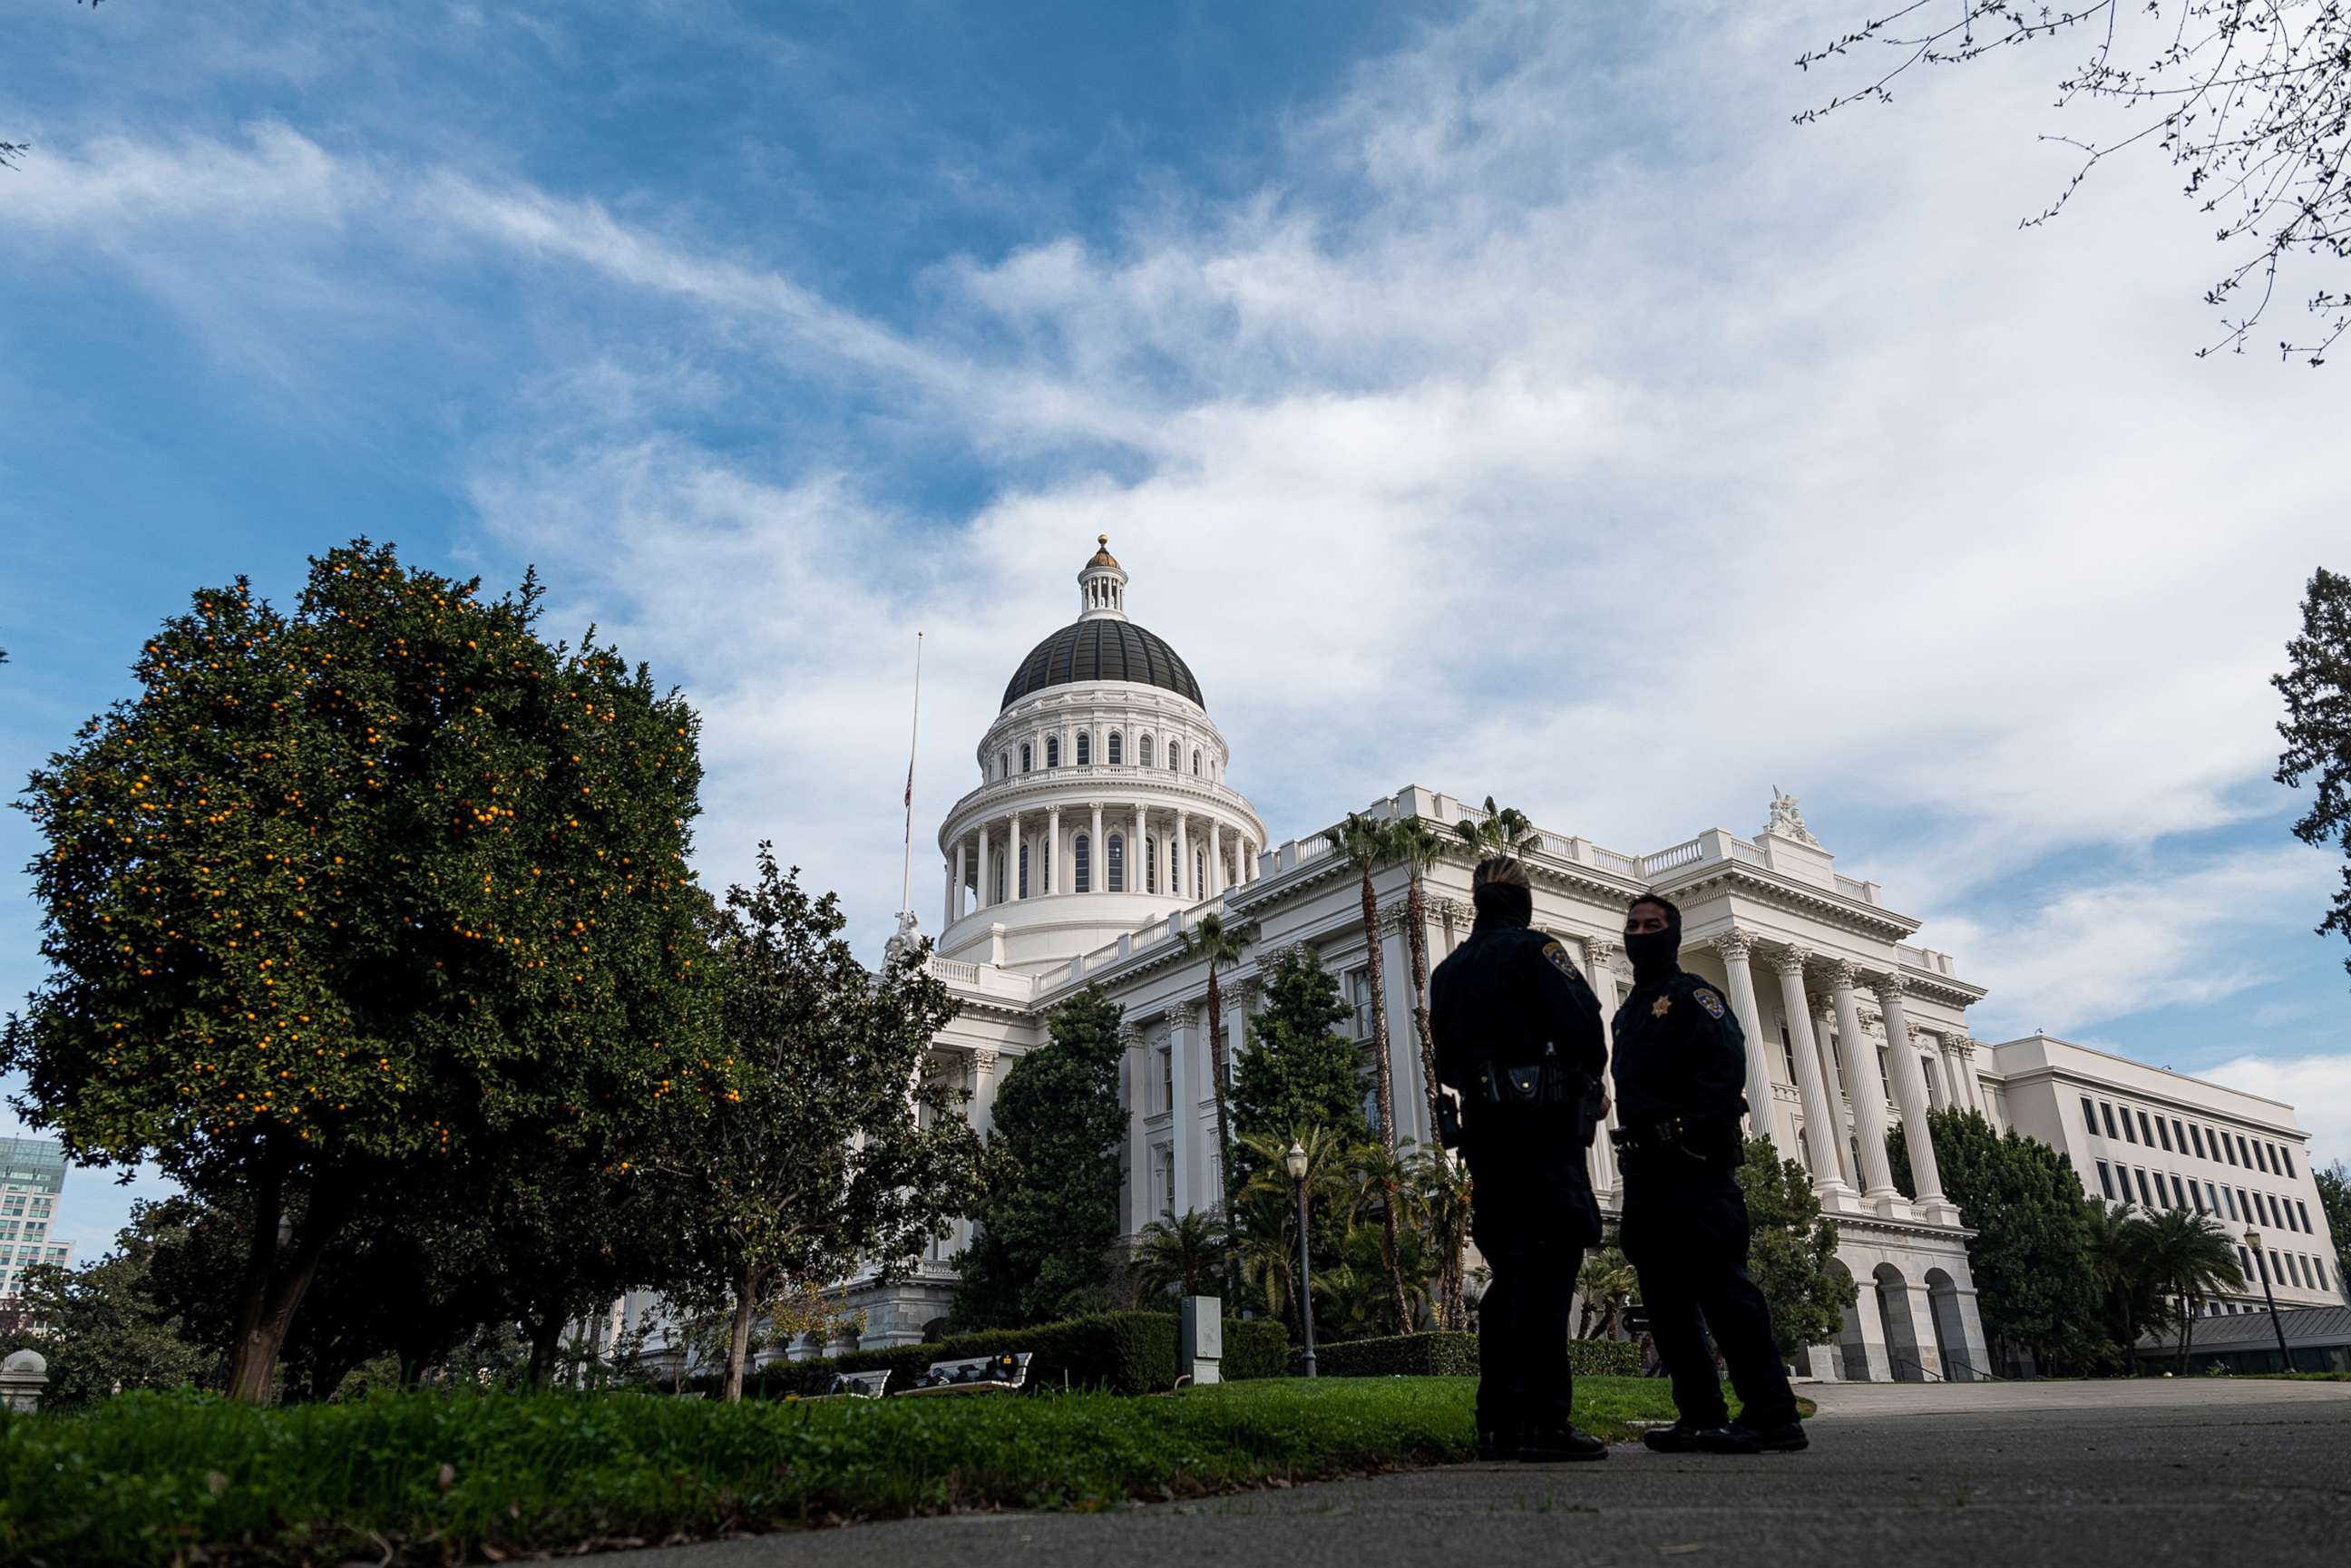 PHOTO: Members of the California Highway Patrol wearing protective masks stand outside the California State Capitol building in Sacramento, Calif., Jan. 15, 2021.